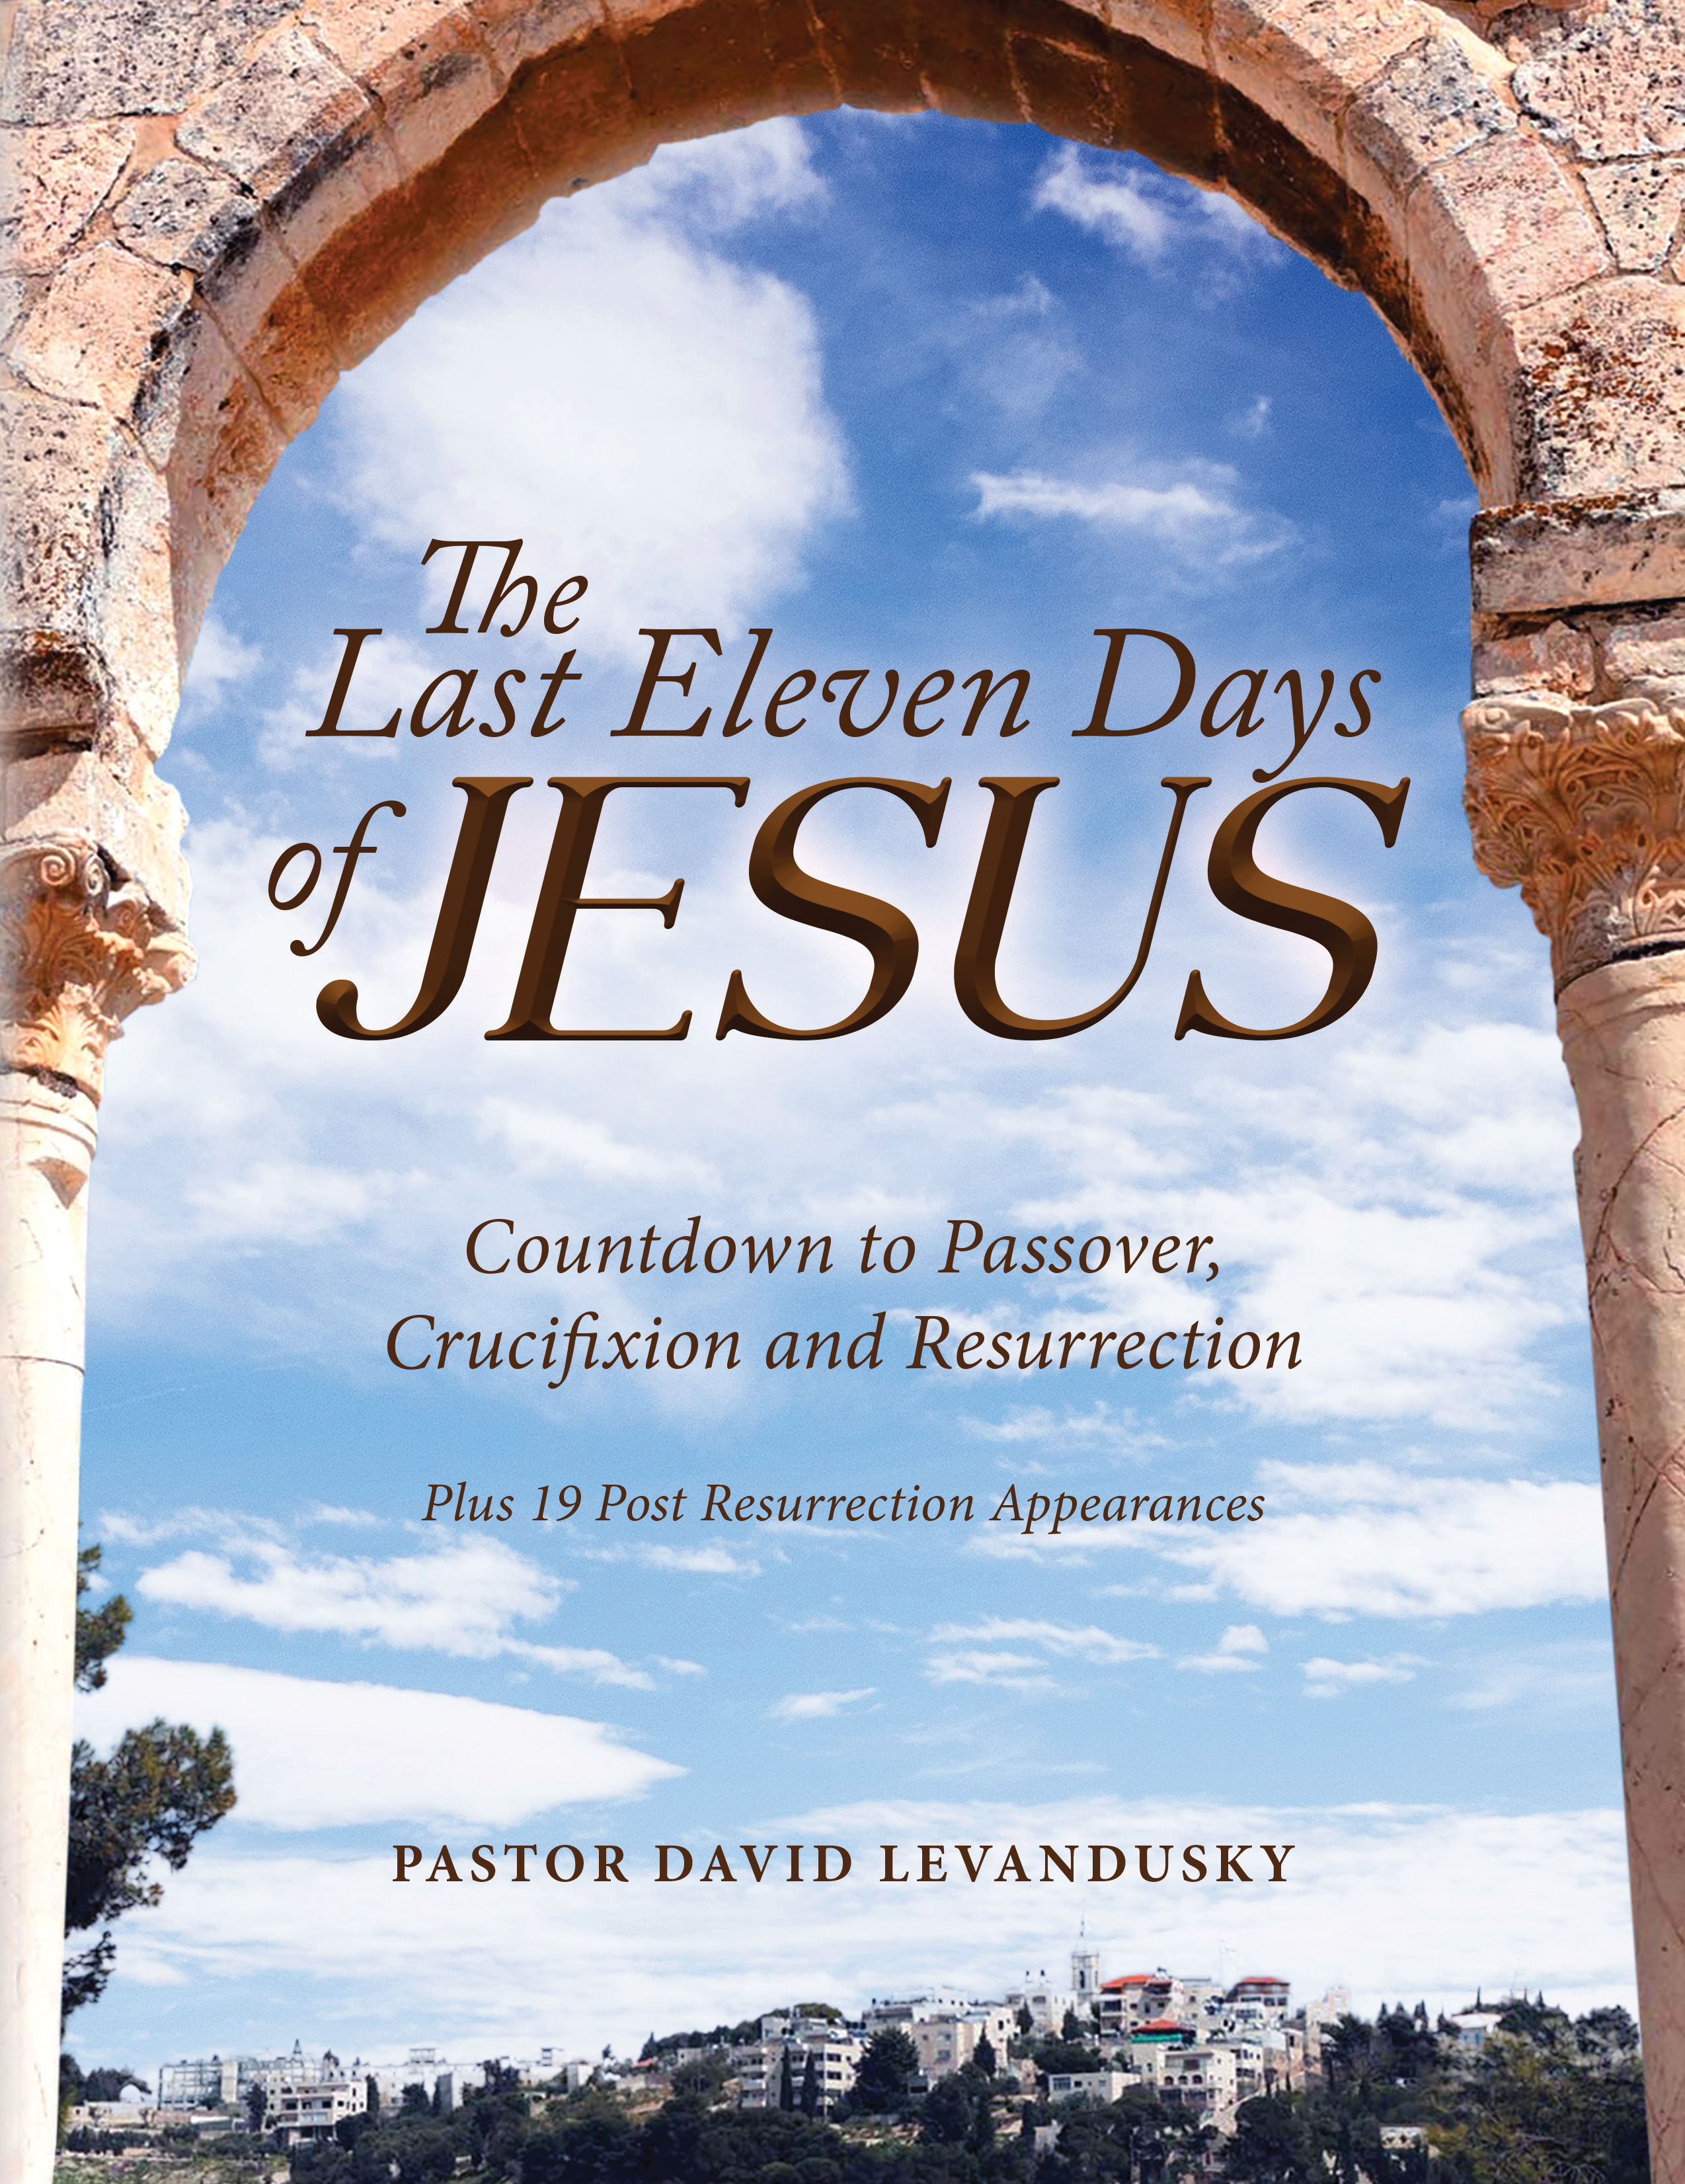 The Last Eleven Days of Jesus by Pastor David Levandusky Now Available